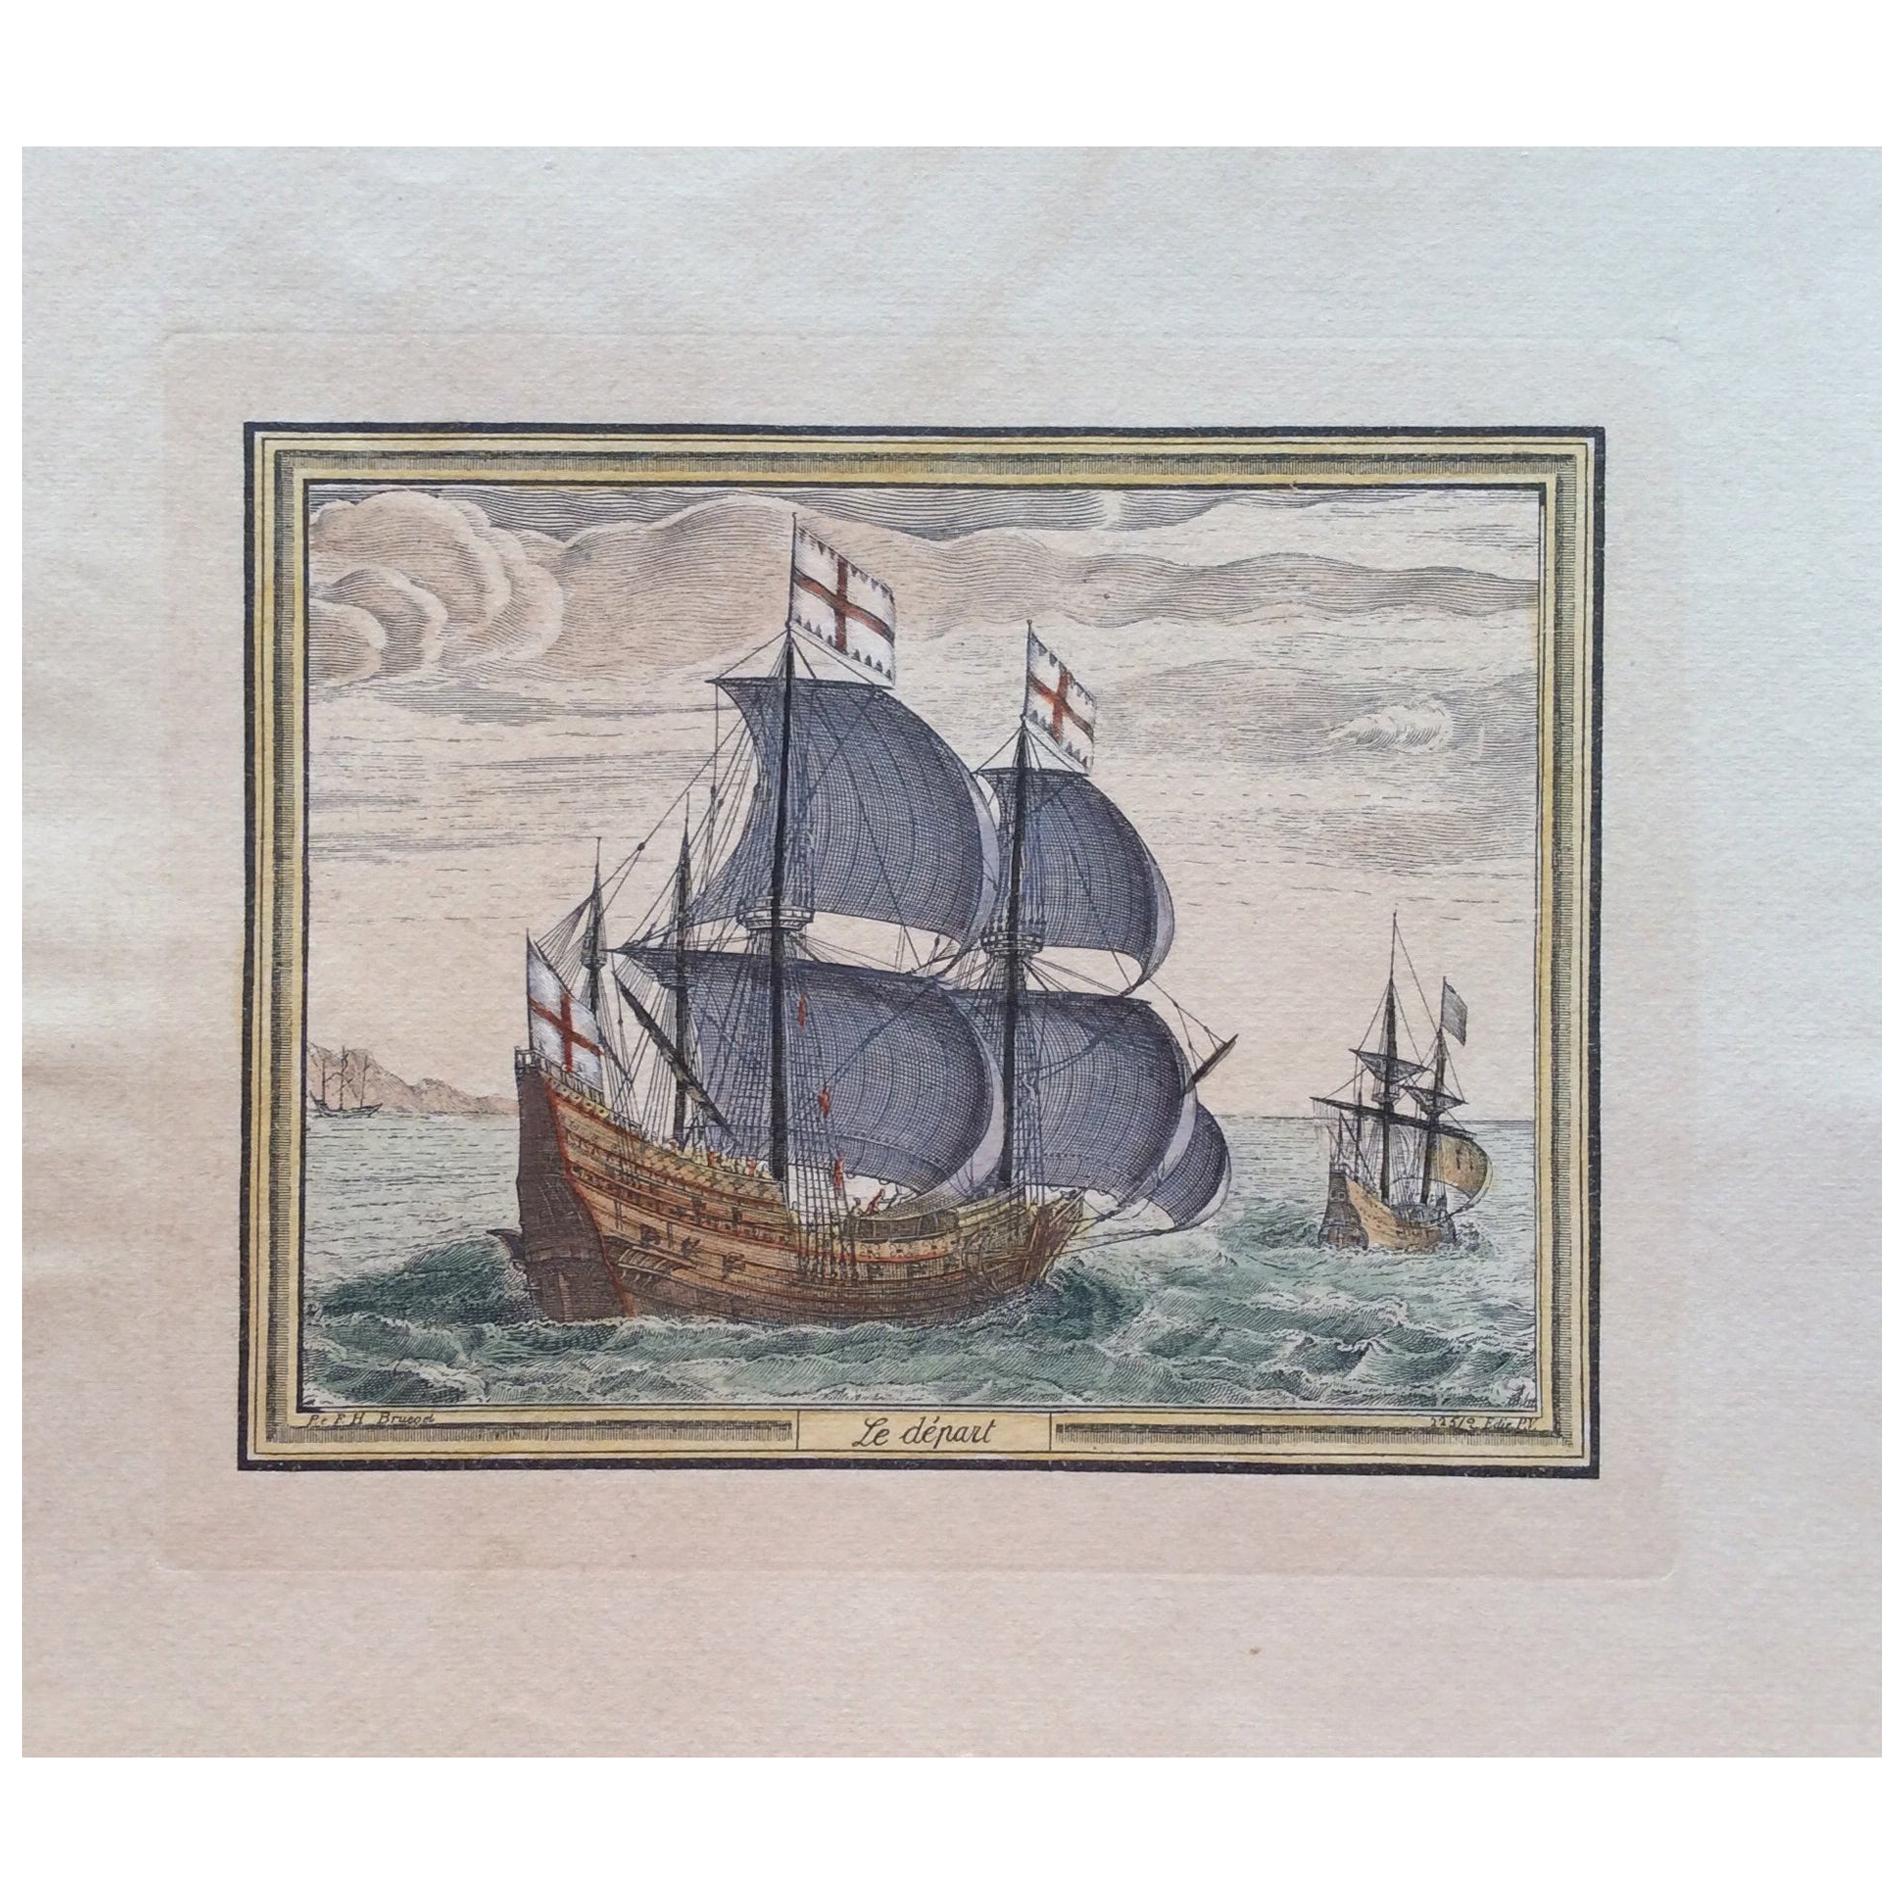 18th Century Color Engraving Print by Pieter F.H. Bruegel, Le Depart For Sale